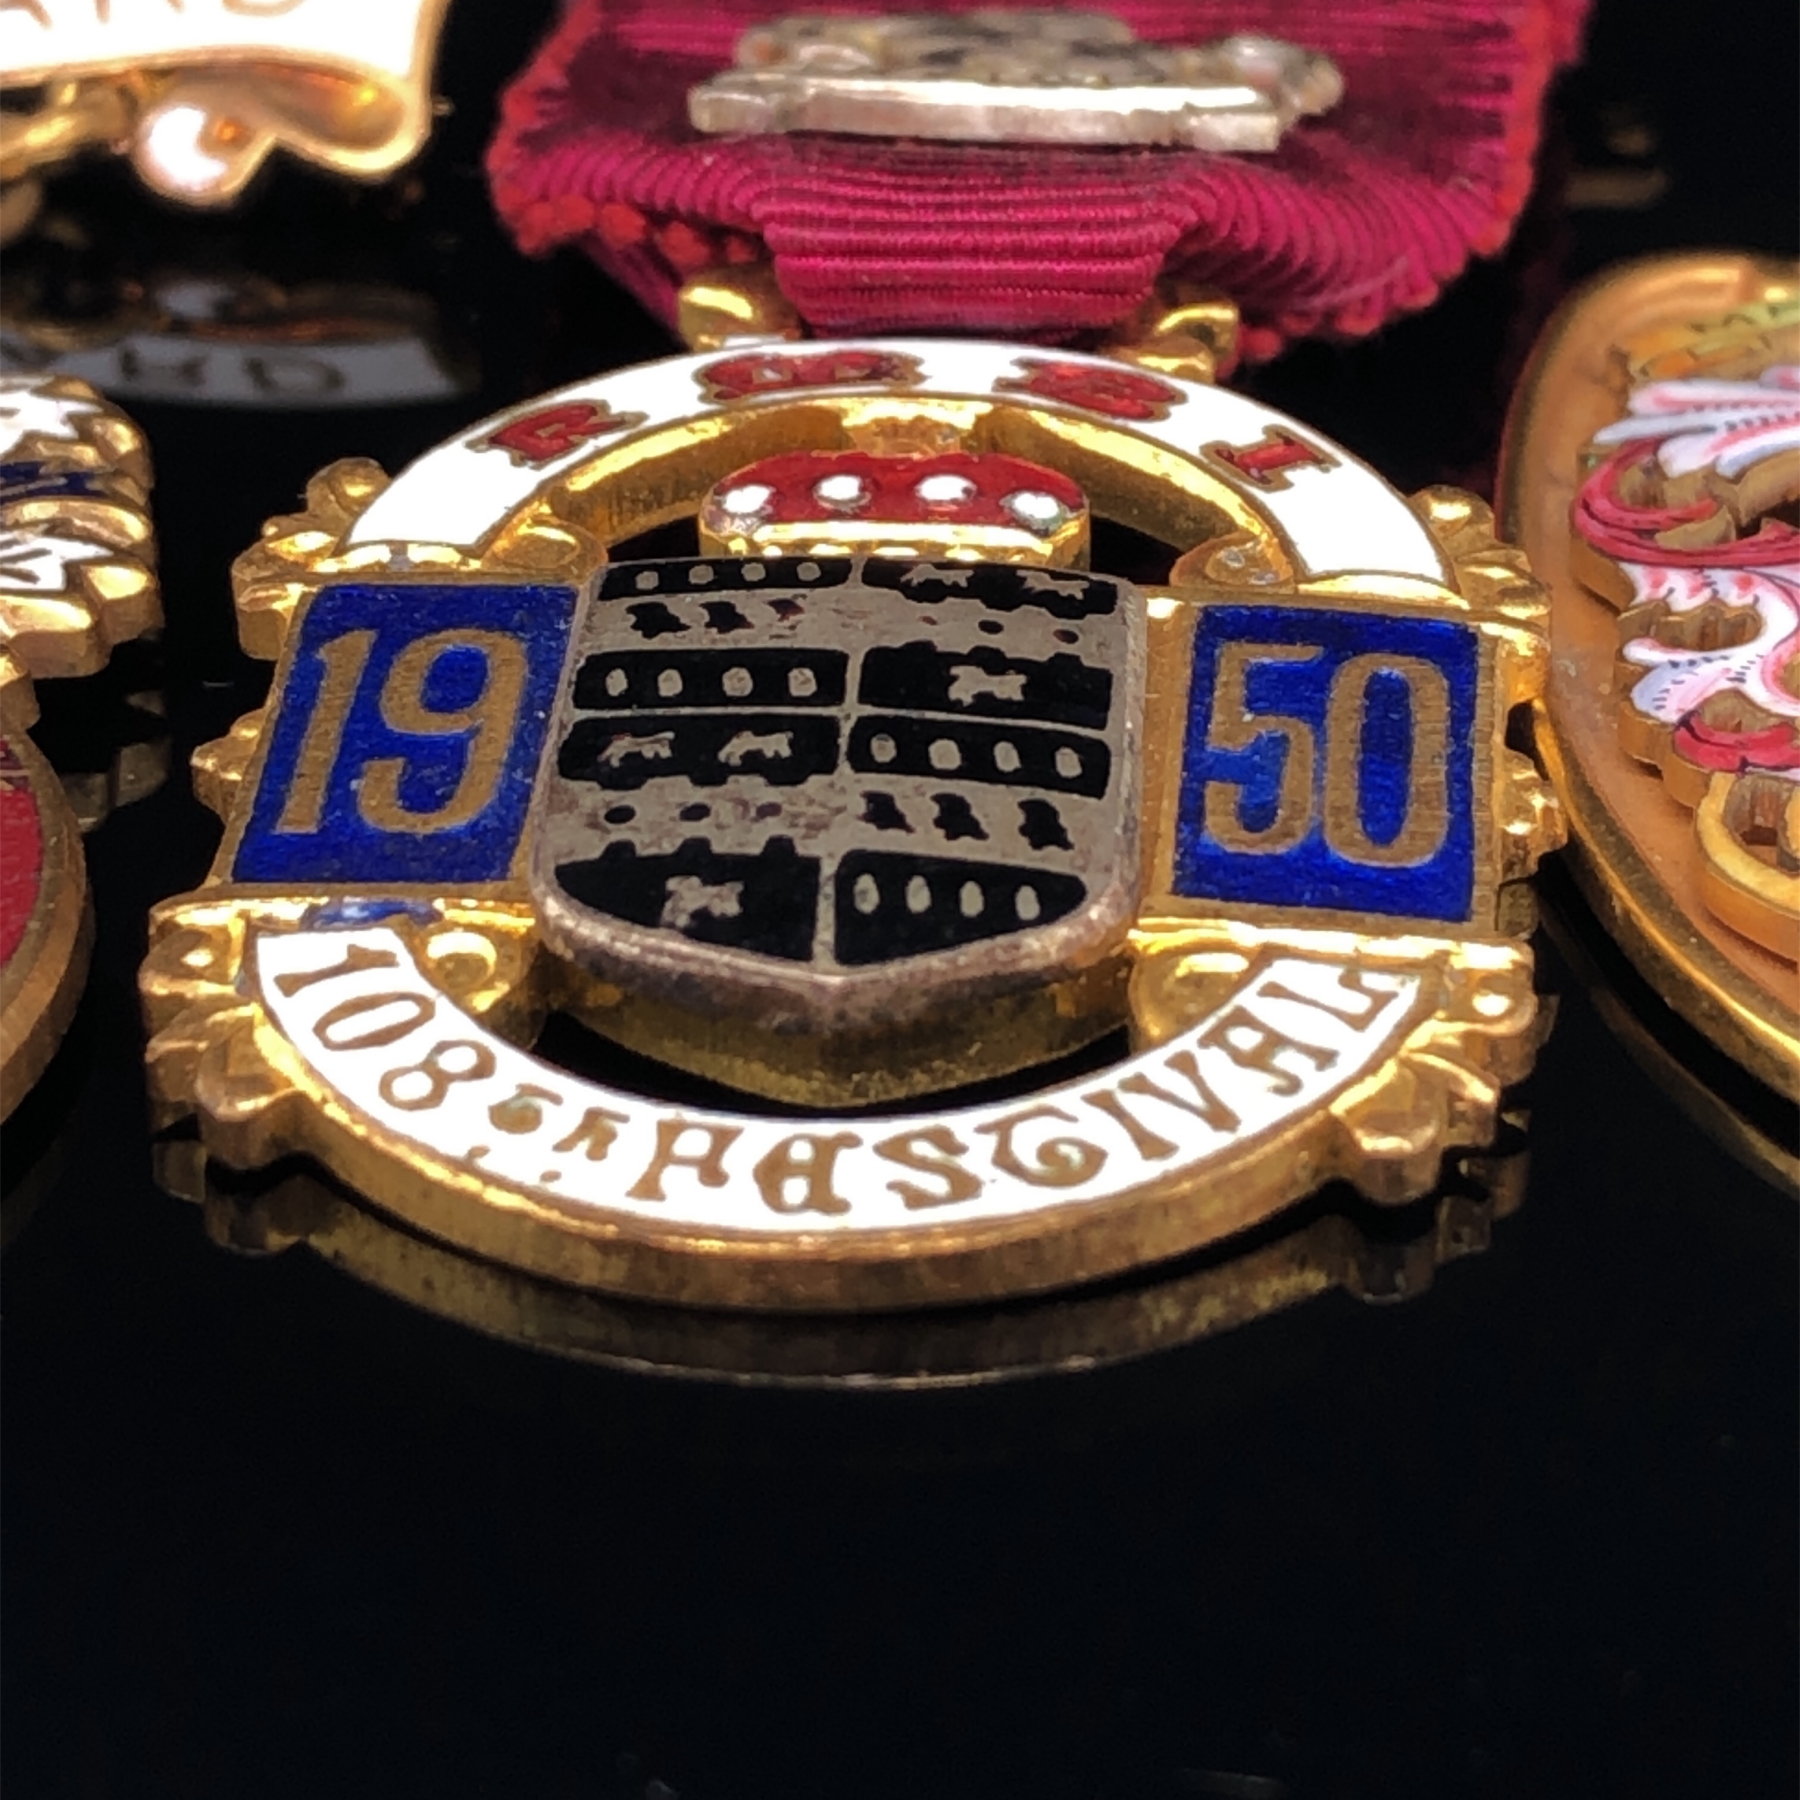 A HALLMARKED 9ct GOLD AND ENAMEL MAYORS MEDALLION, ENGRAVED WITH ENAMEL BANNERS 1951-54, AND FLOREAT - Image 5 of 11